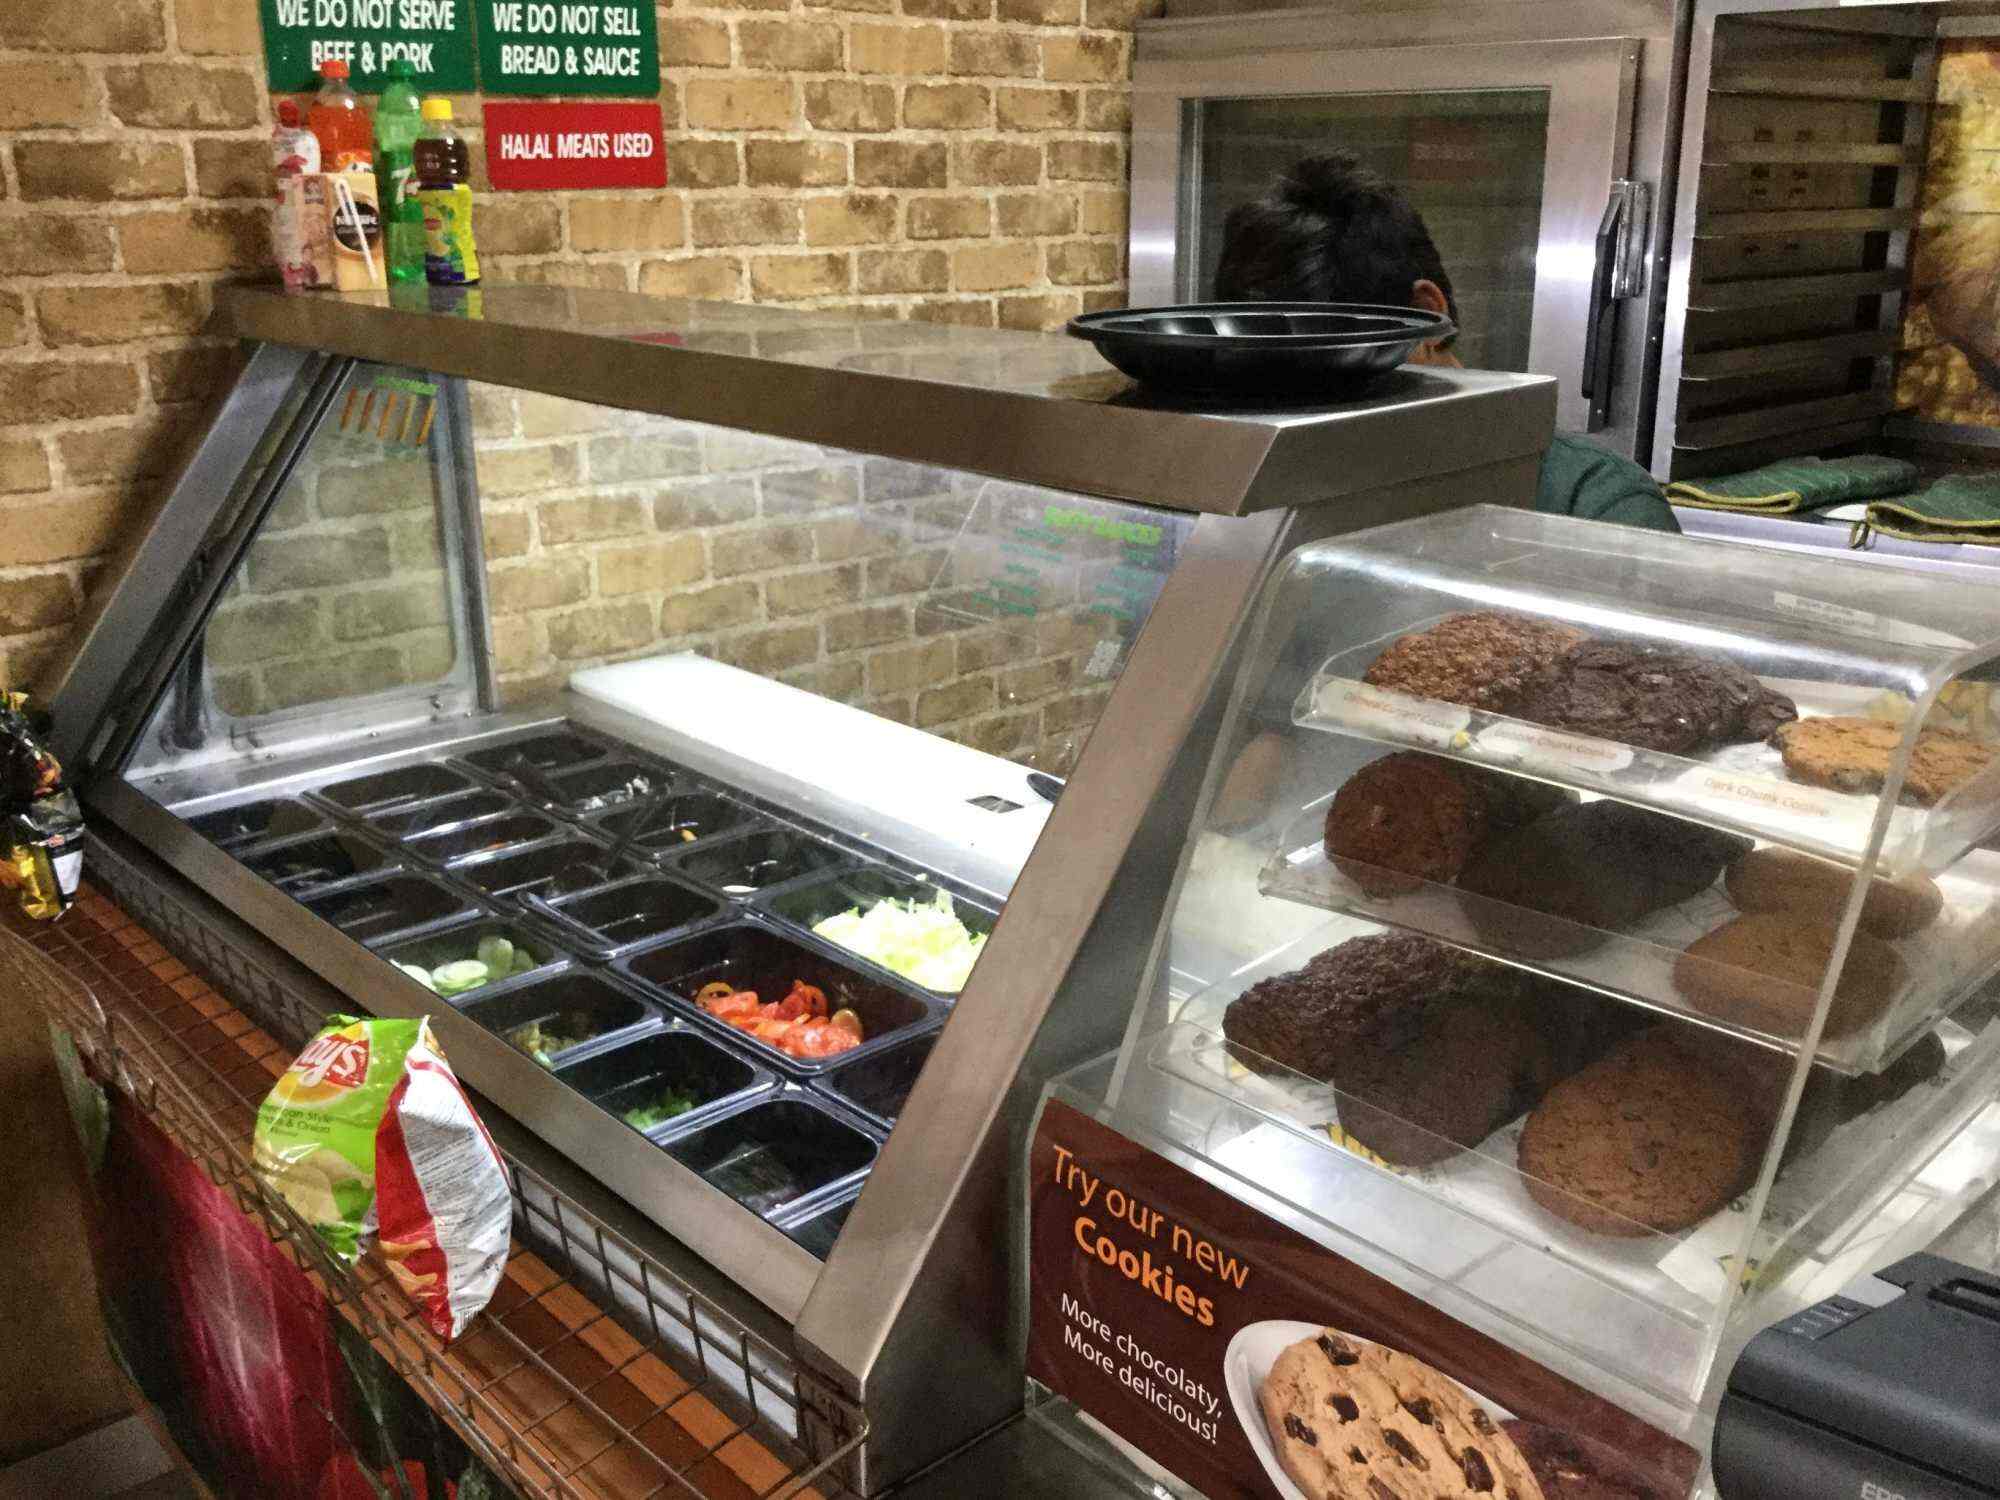 amy cloney recommends subway now sells cakes pic